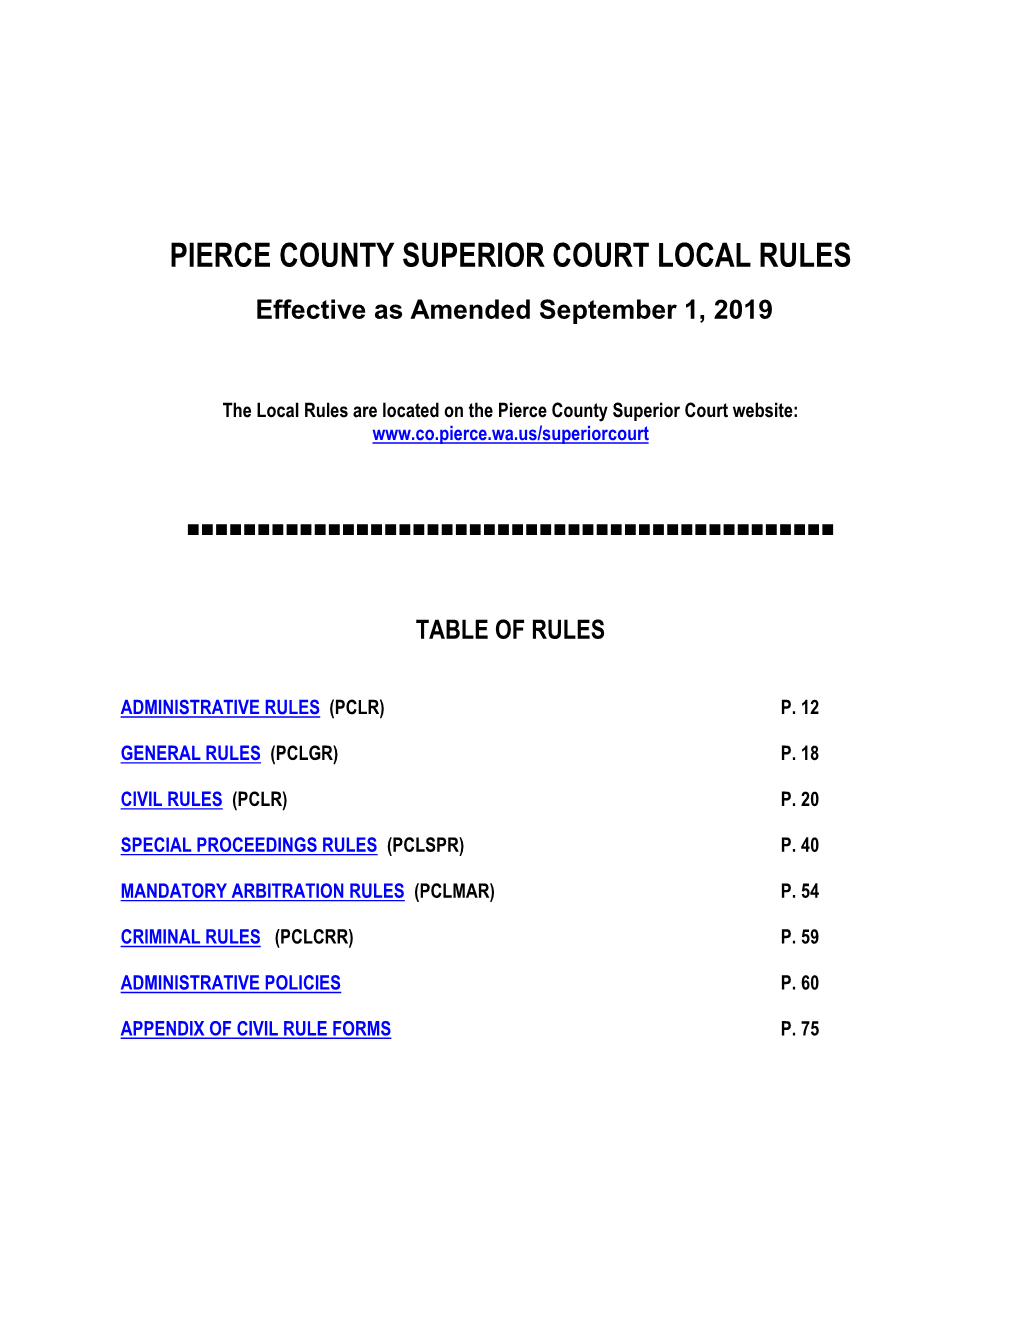 Local Rules of the Superior Court for Pierce County